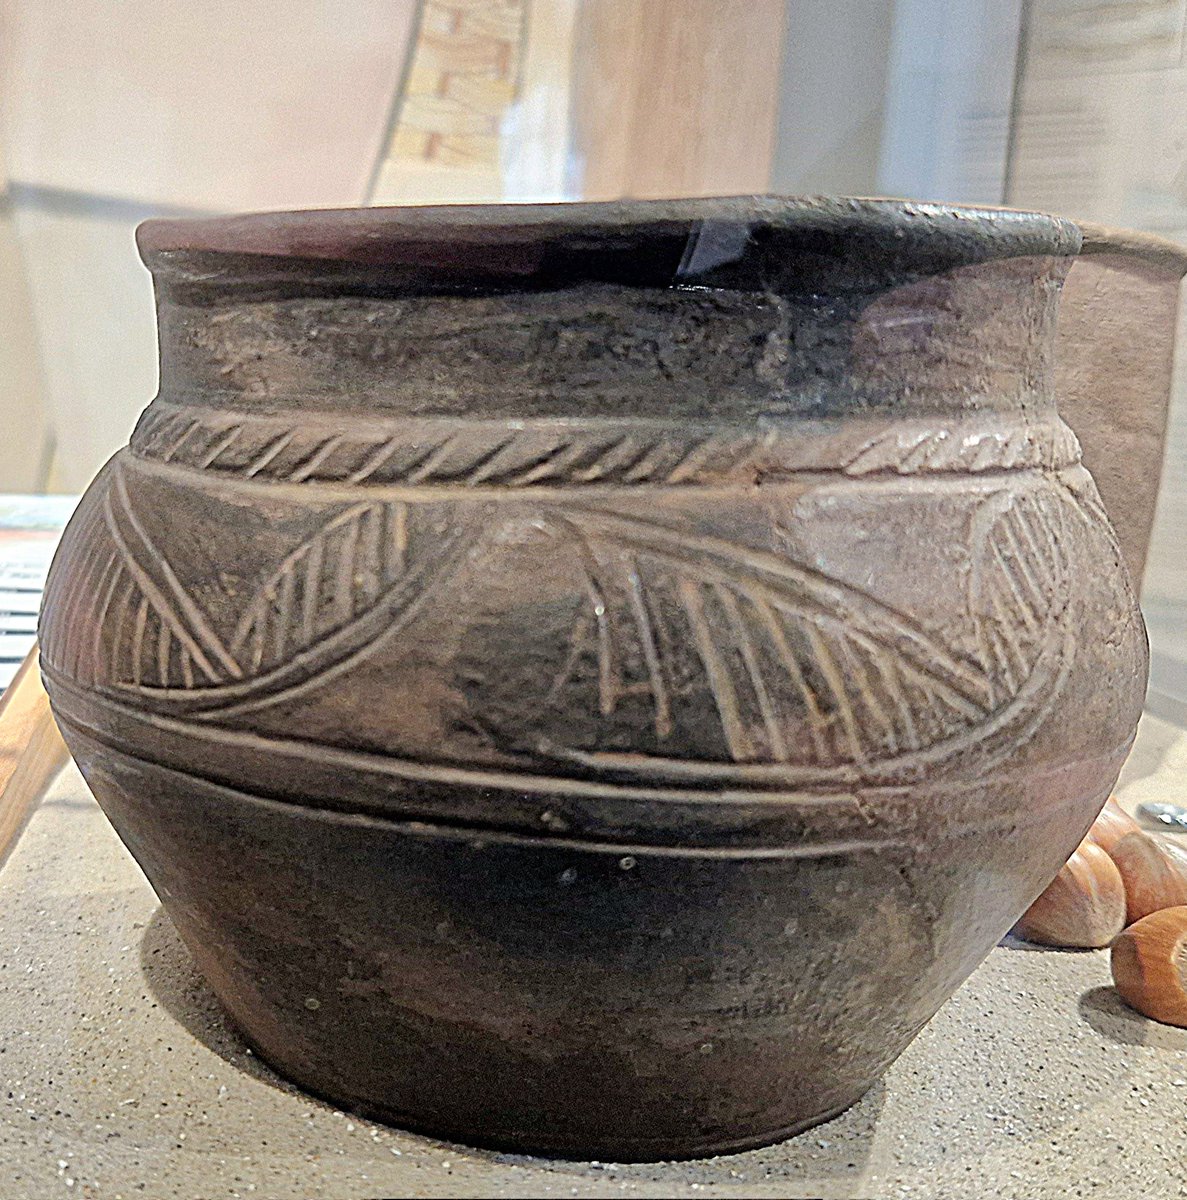 A wonderfully tactile, middle Iron Age decorated *Glastonbury Ware* bowl for #FindsFriday

Found during excavations at Mill Plain (now the Avon Industrial Zone) Christchurch #Dorset

On display in the wonderful @RedHouseMuseum

Hoping we find something similar on #Durotriges24 🤞